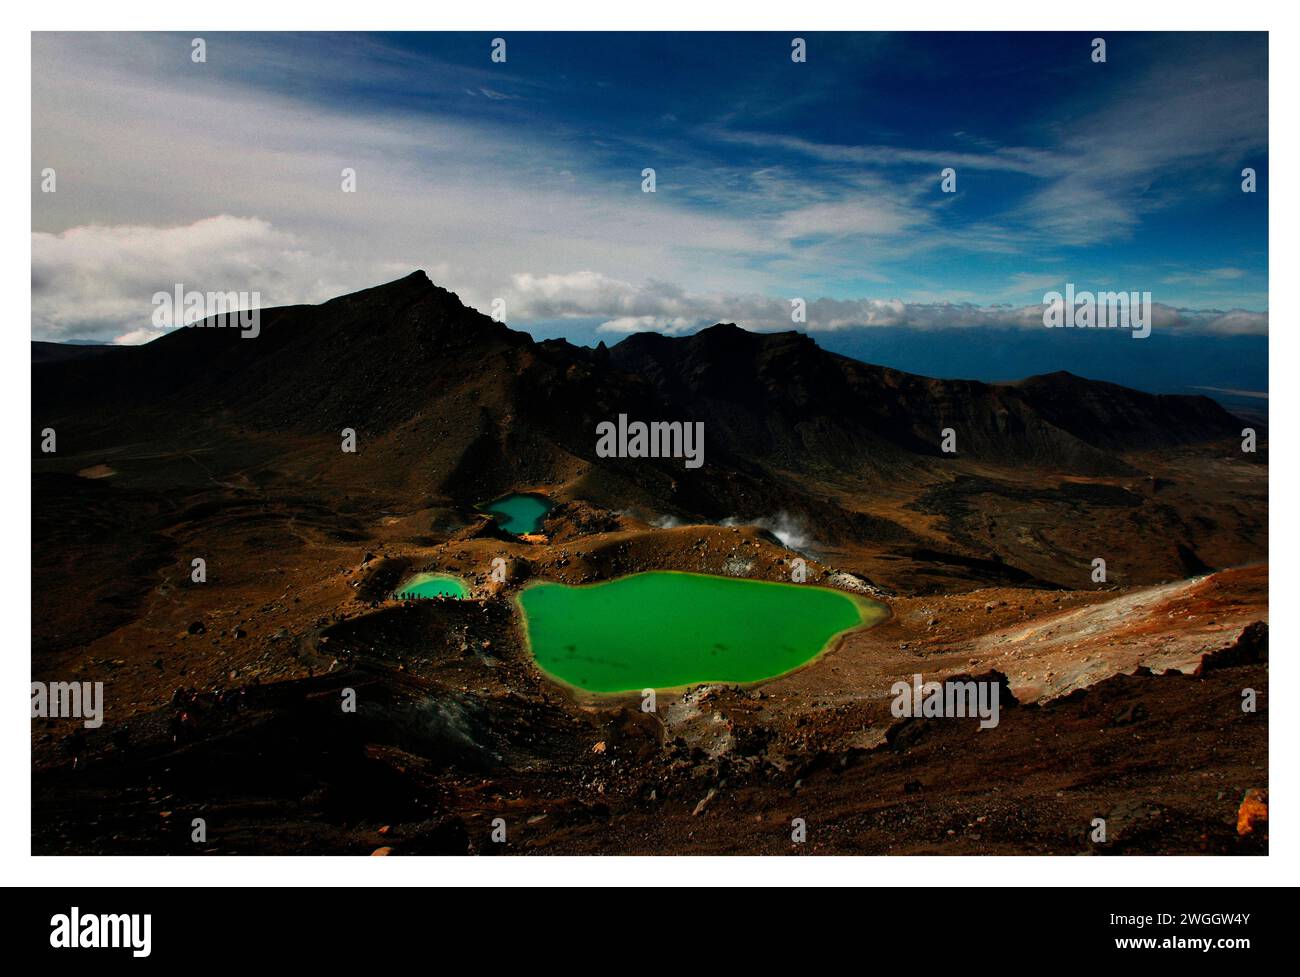 The Emerald Lakes photographed near the Red Crater on the Tongariro Crossing, New Zealand. Stock Photo